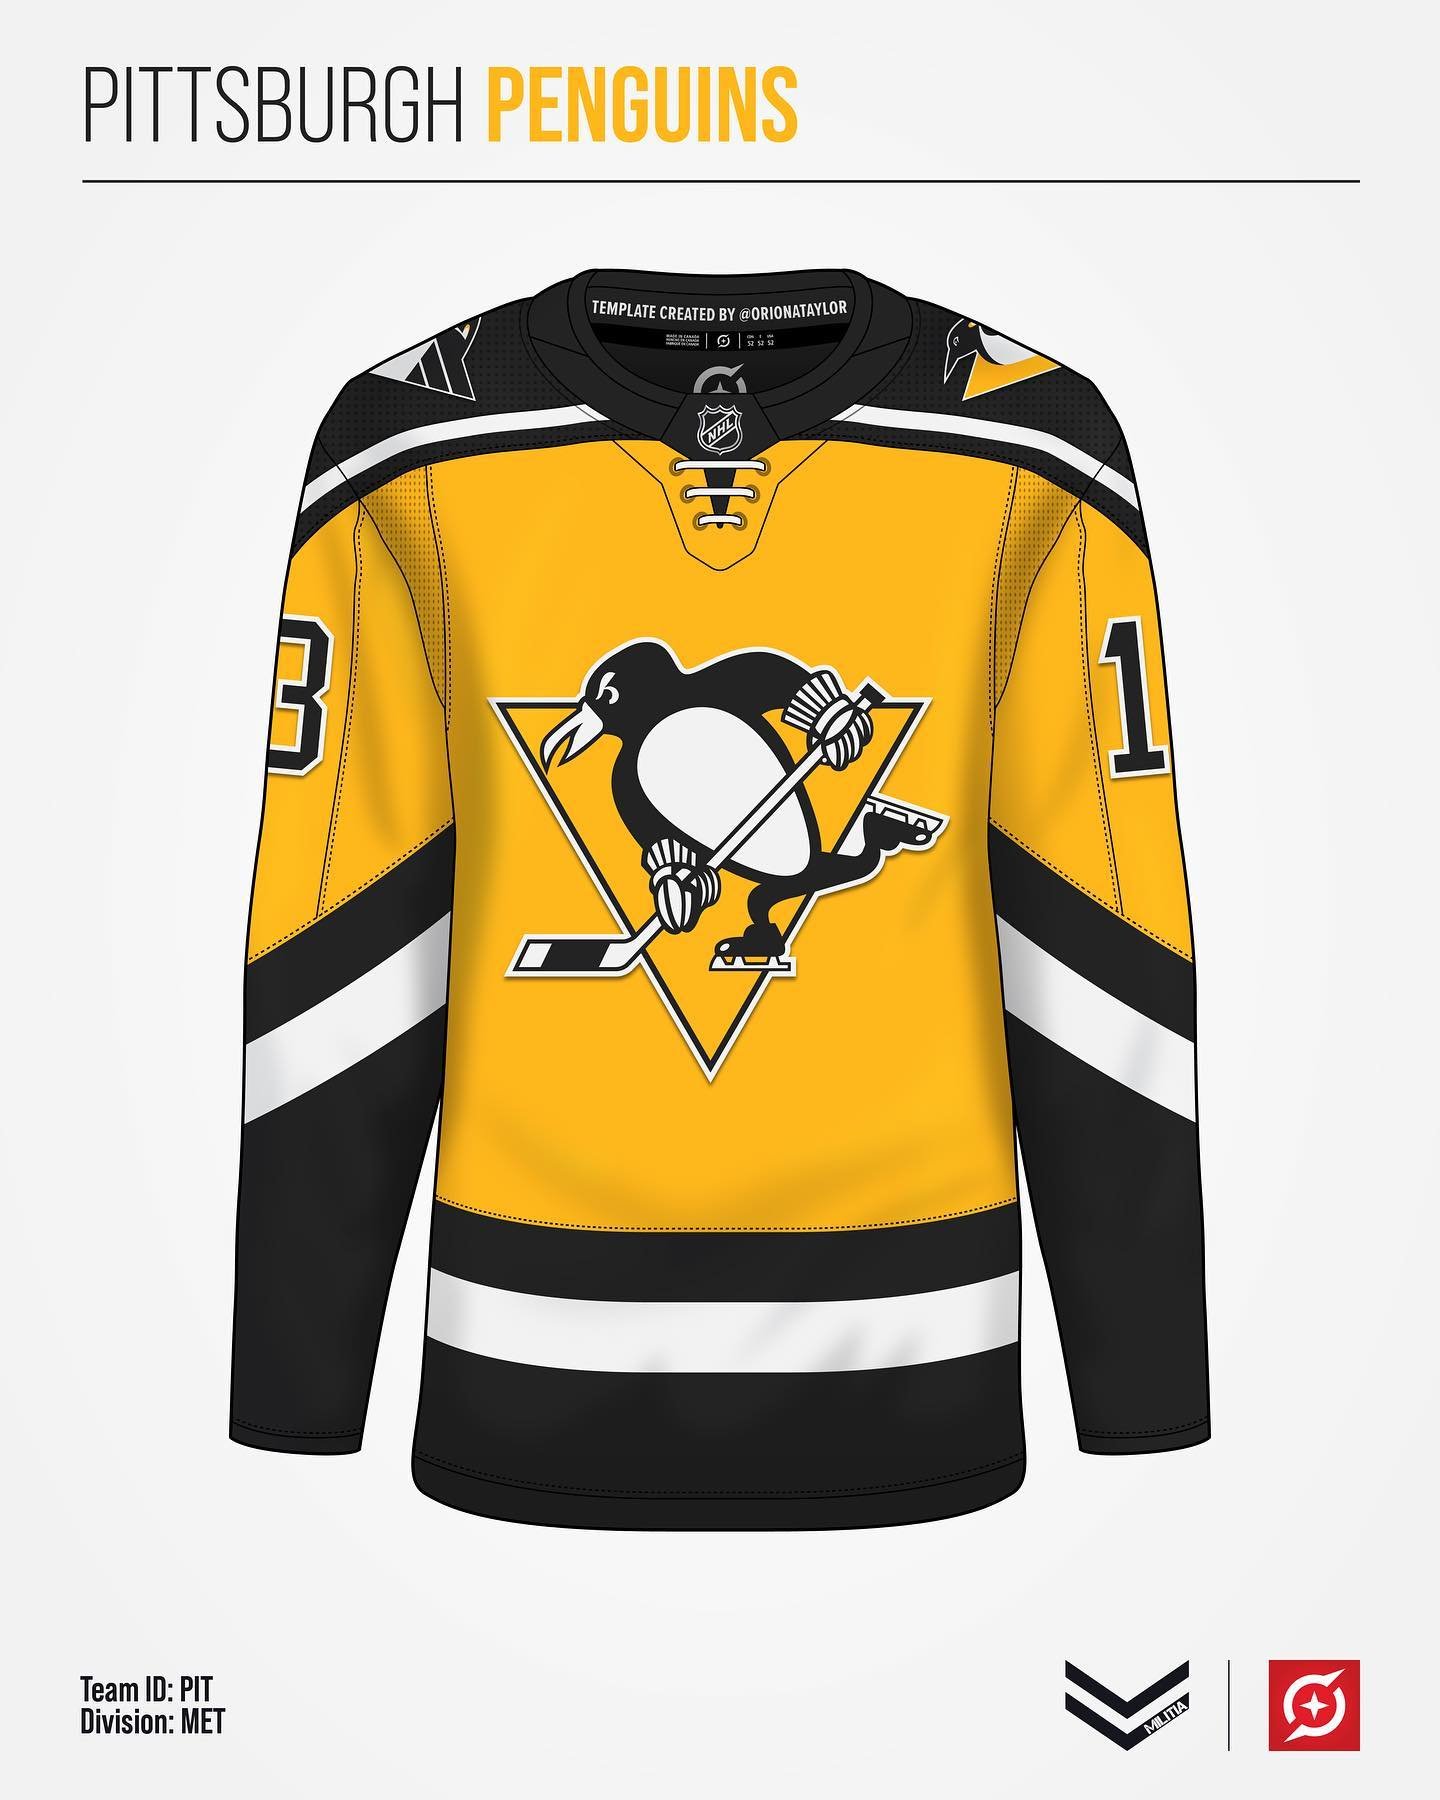 In today&rsquo;s Retromix release, we&rsquo;ve got the @penguins. 

I didn&rsquo;t stray too far from the typical penguins fashion for the home and away jerseys. I took the base jersey from the 1992 Robo Penguin, and swapped the colours. The logo is 